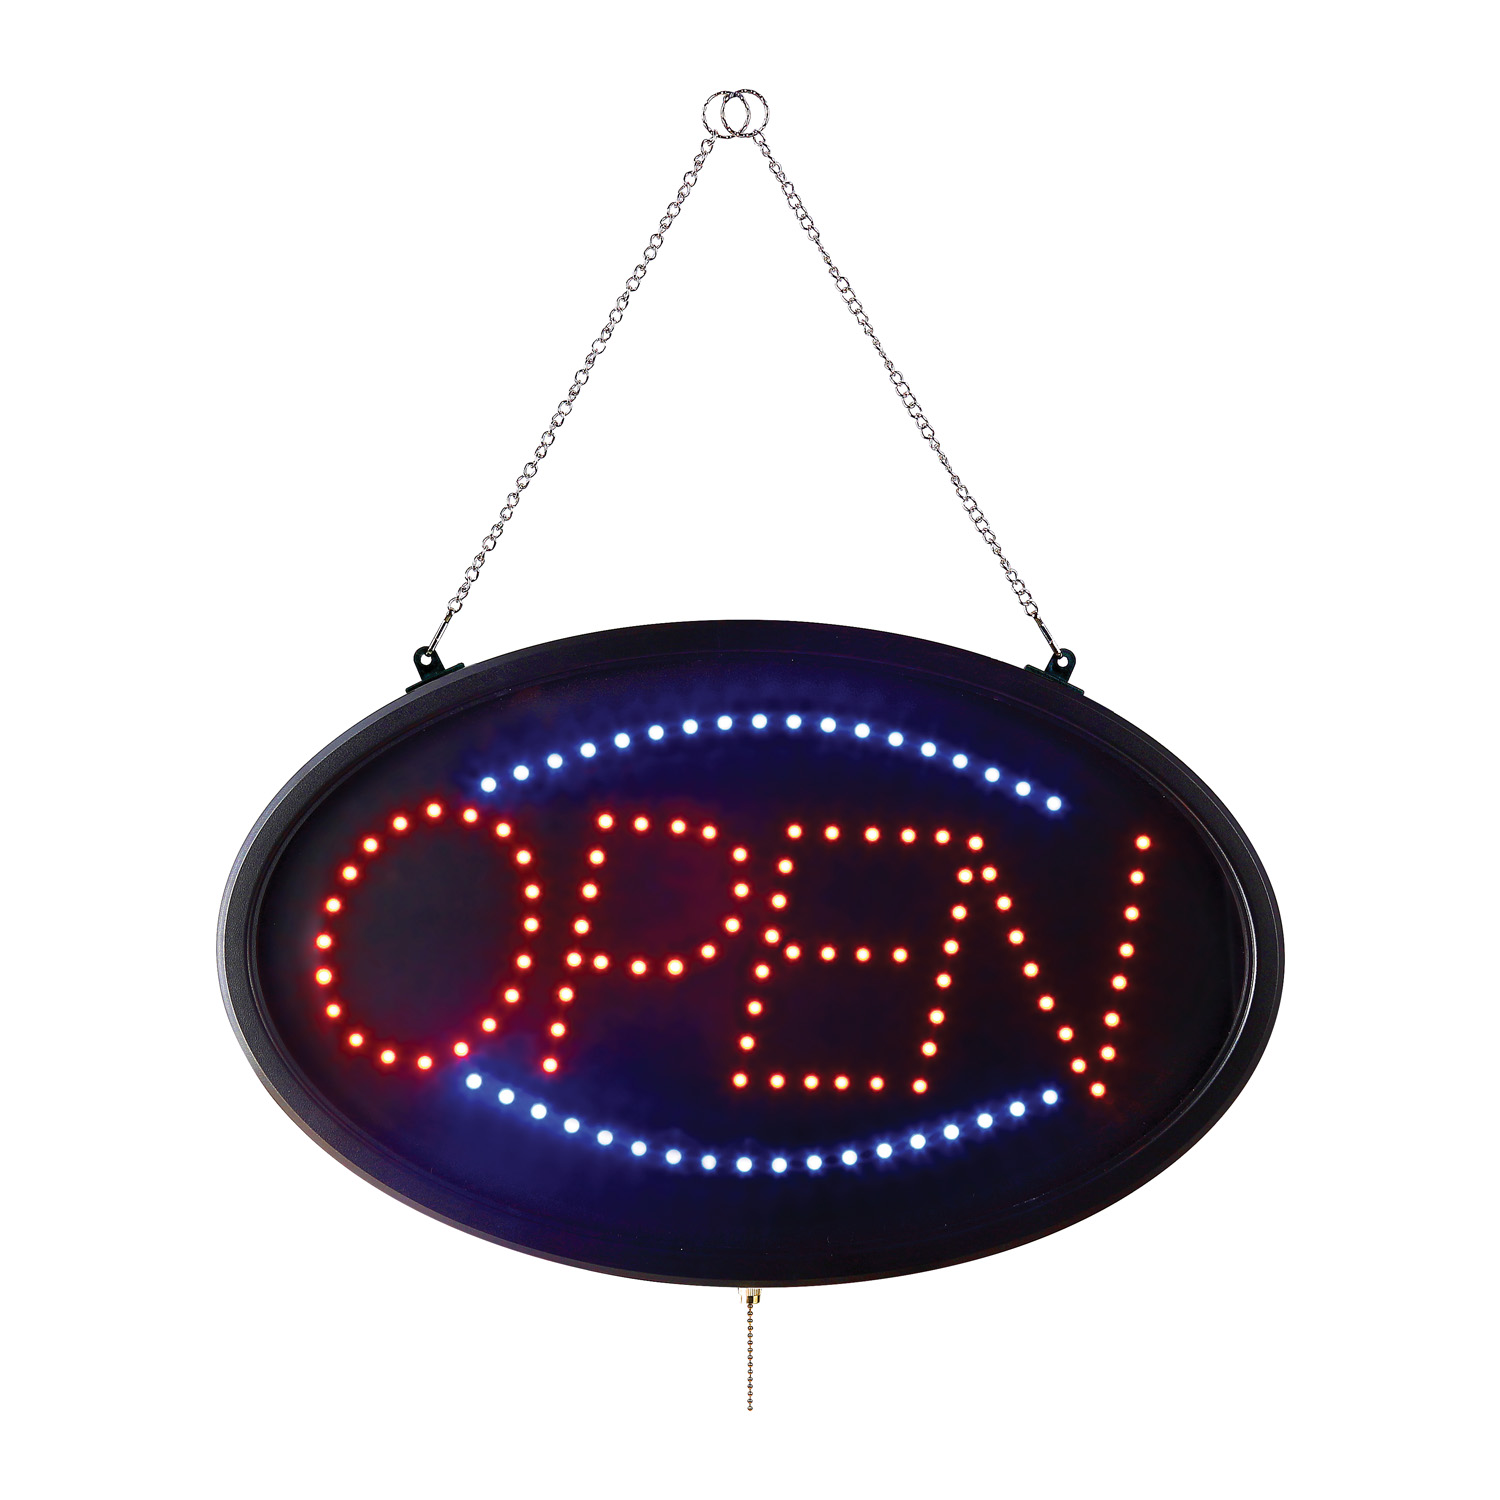 CAC China SLED-OP02 LED Sign "OPEN" Oval 3 Modes